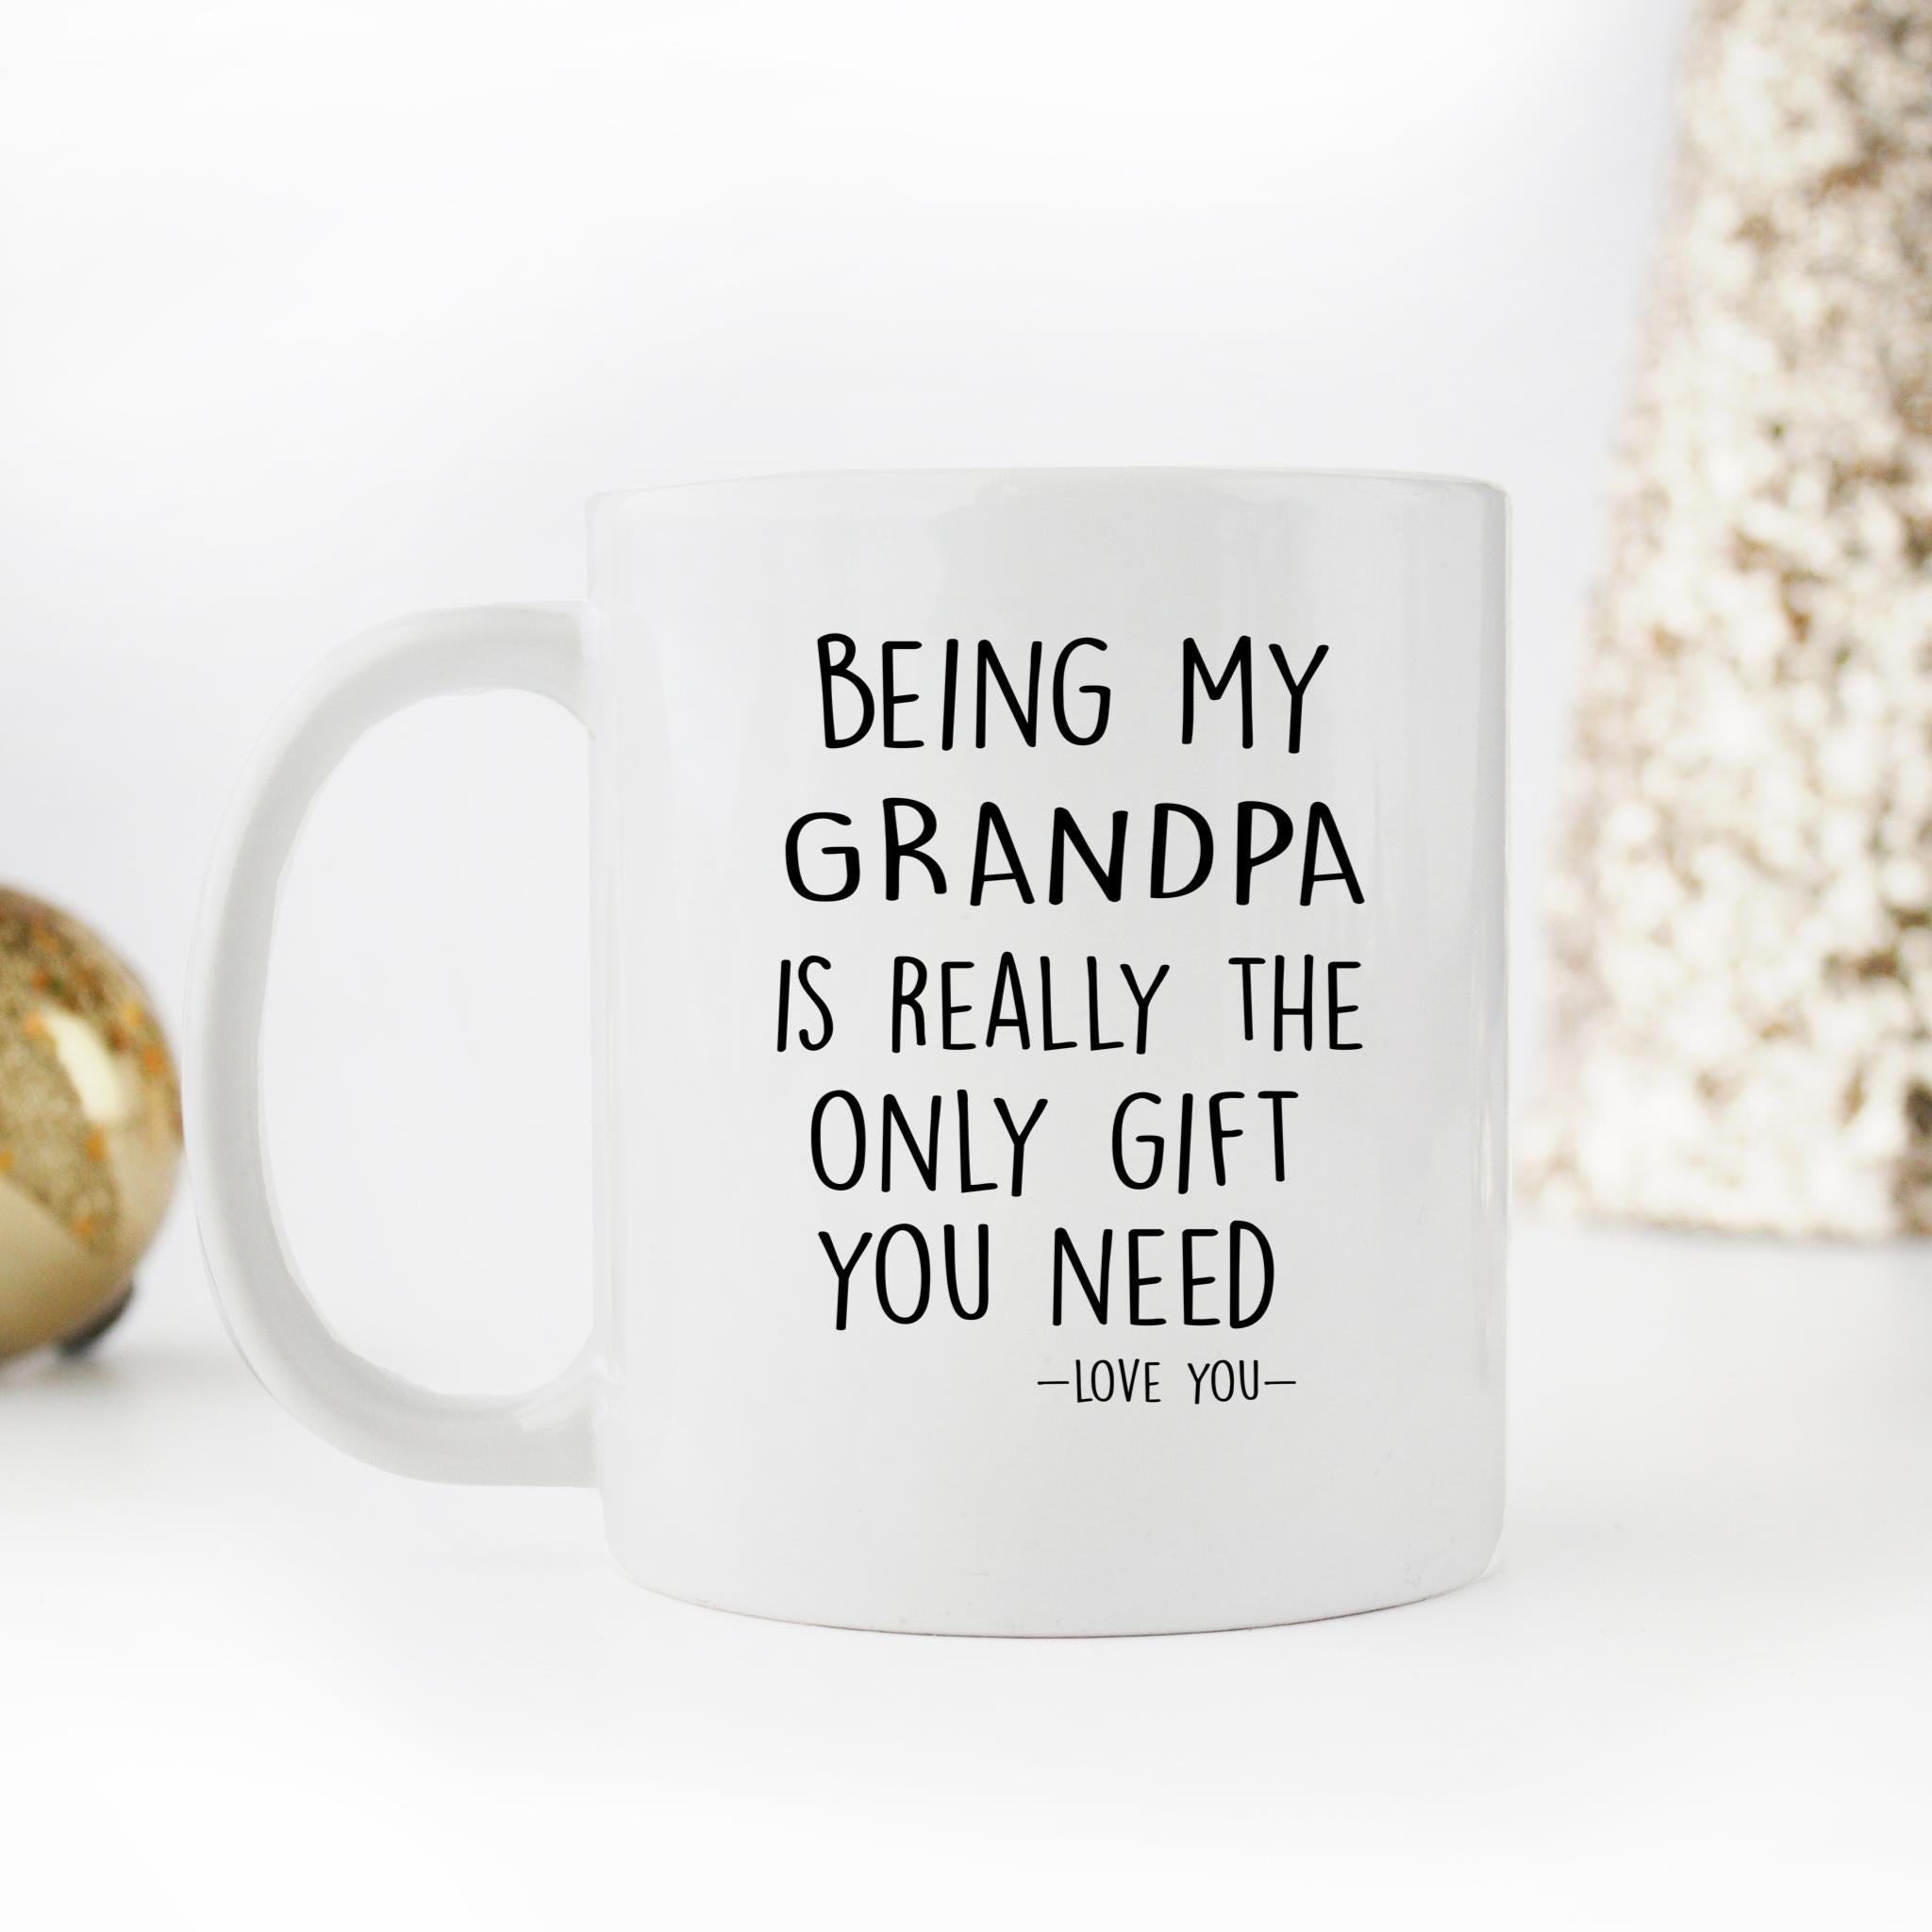 Skitongifts Funny Ceramic Novelty Coffee Mug Being My Grandpa Is Really The Only You Need  Love You Grandpa Funny For Father's Day Mra2a2d